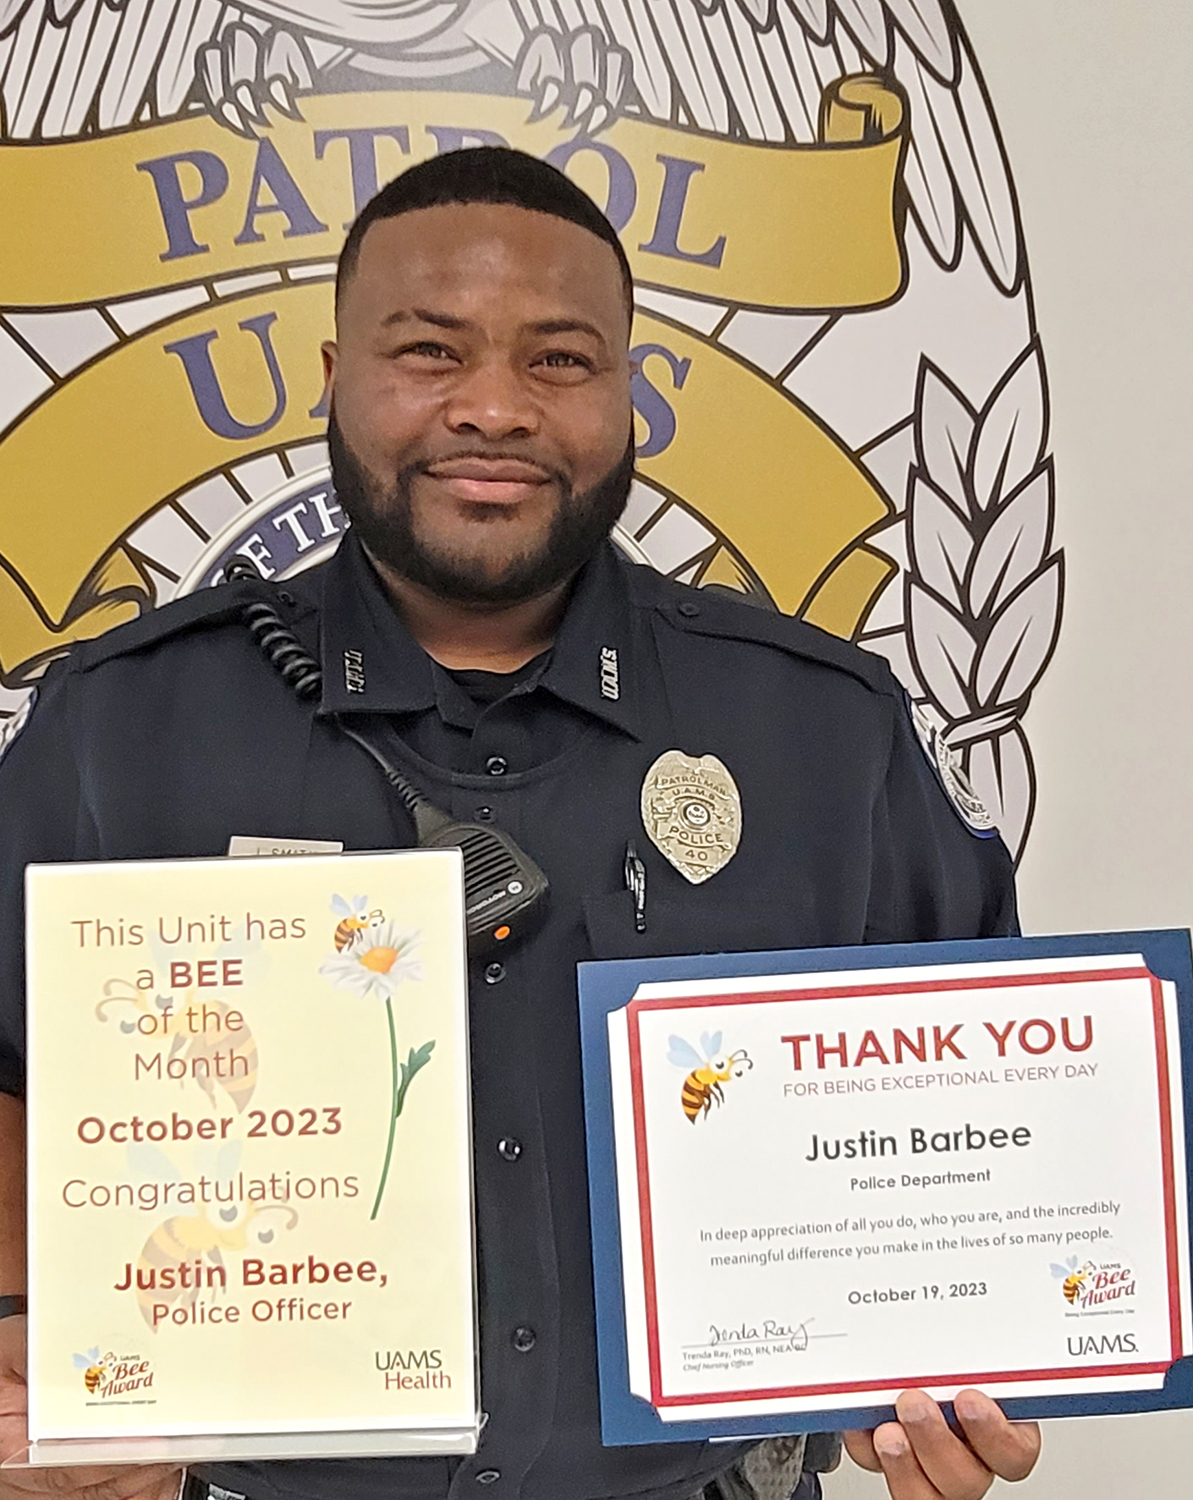 Justin Barbee, Police Officer, Police Department